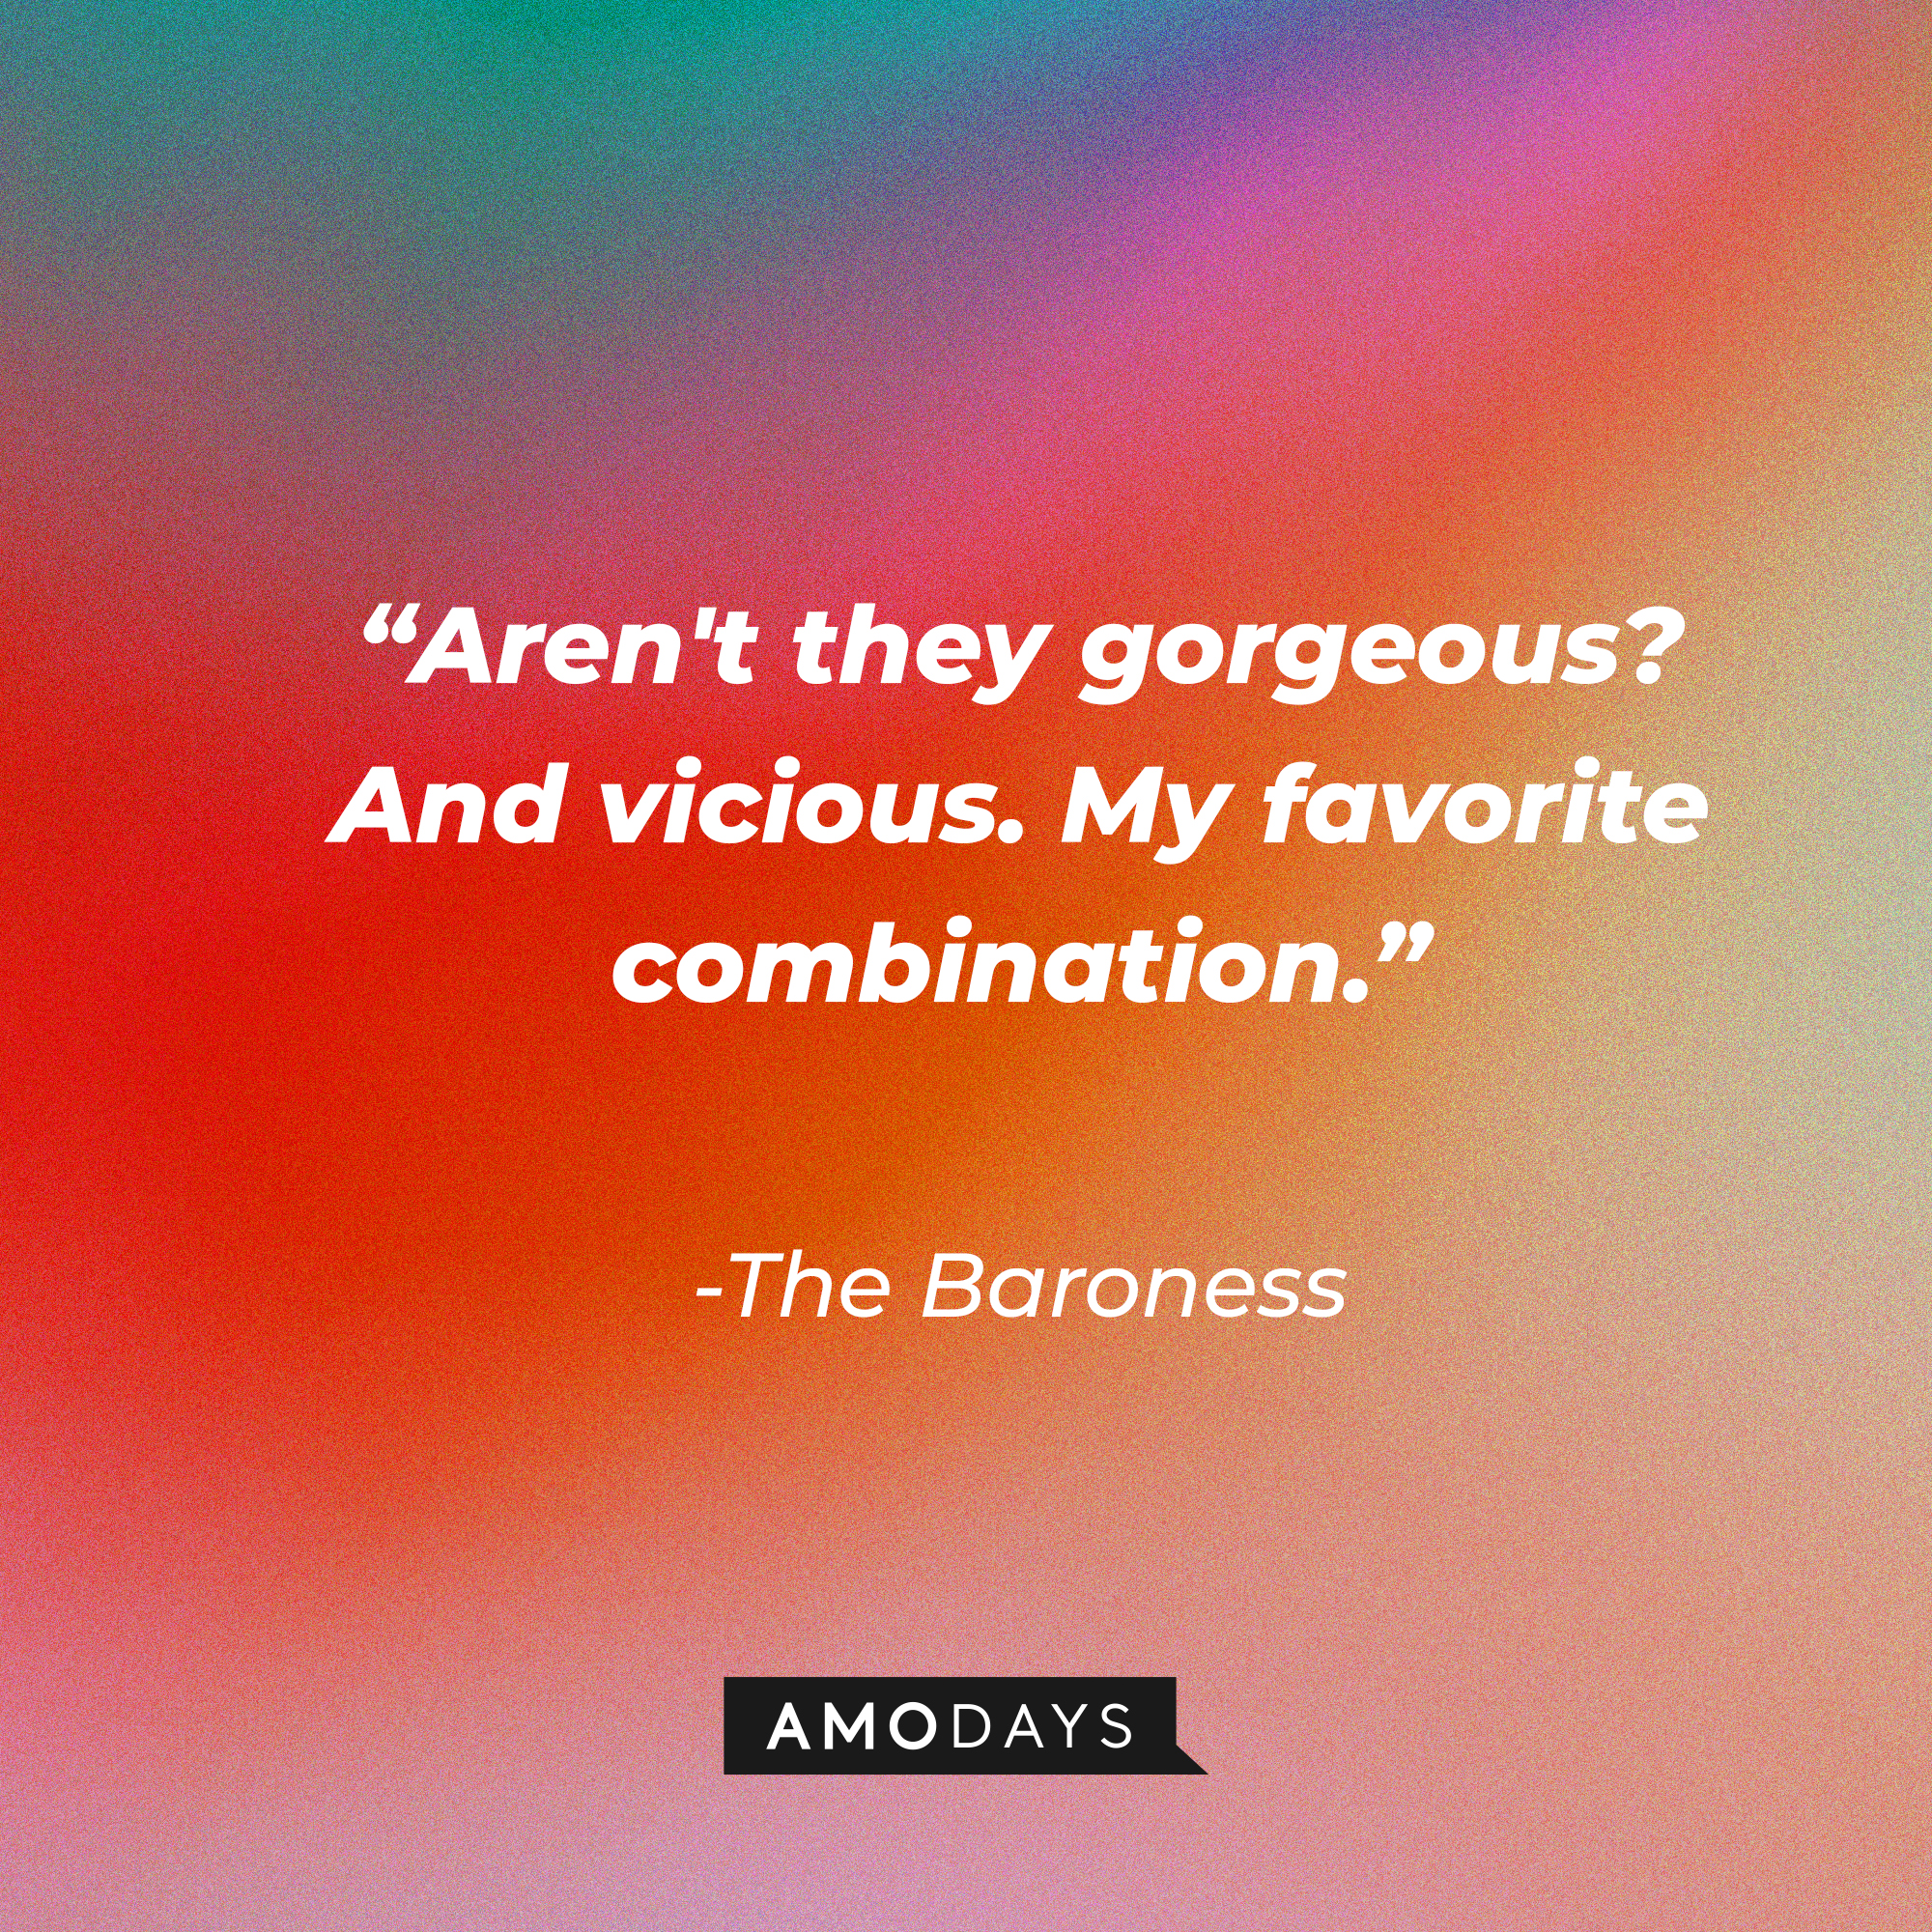 The Baroness's quote: “Aren't they gorgeous? And vicious. My favorite combination.” | Source: Amodays